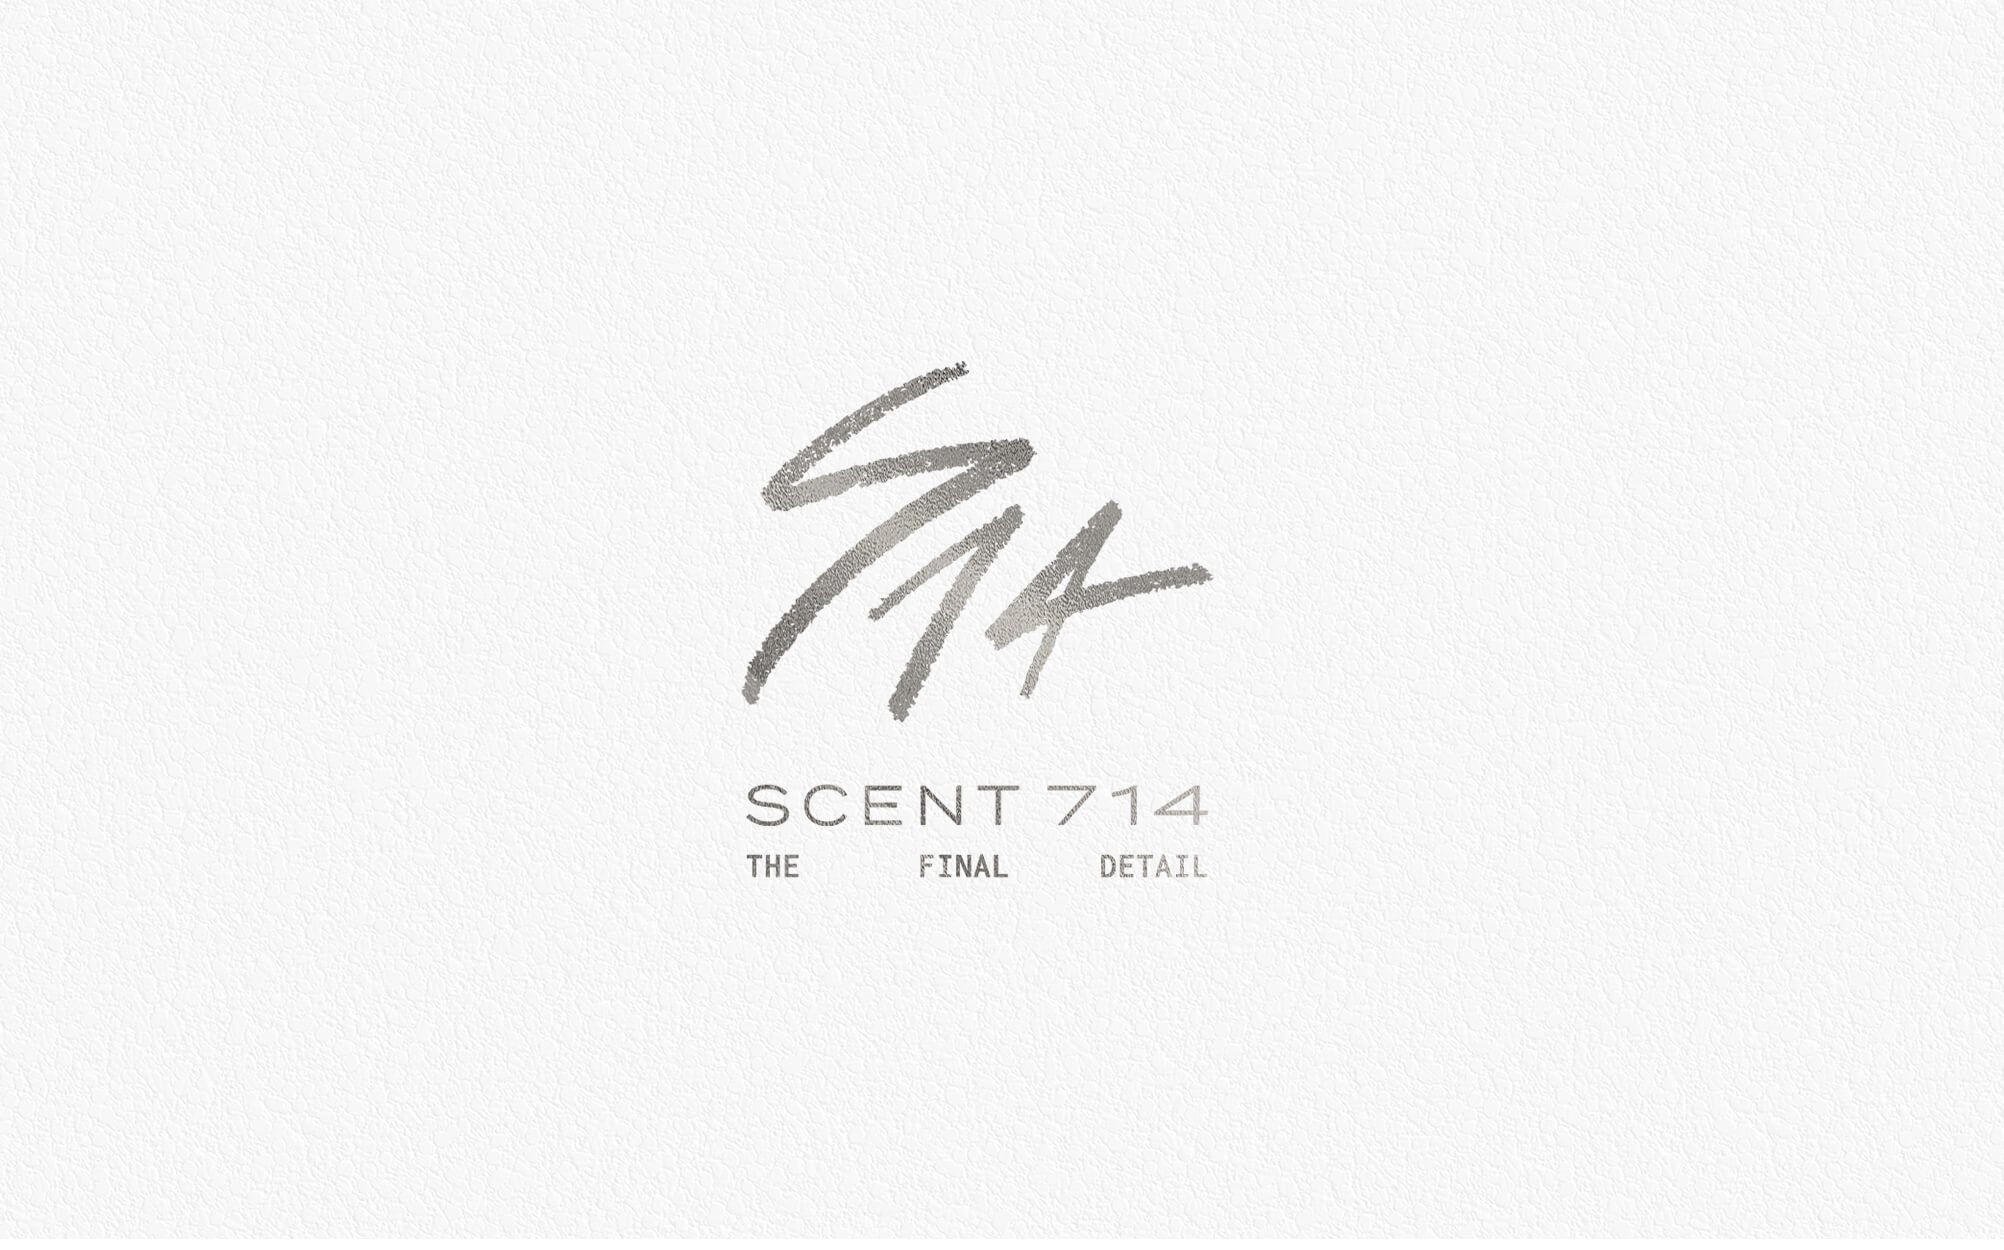 Jacober Creative Brand Identity for Scent 714 Custom Fragrances. Photo of logo in silver foil on a textured background.